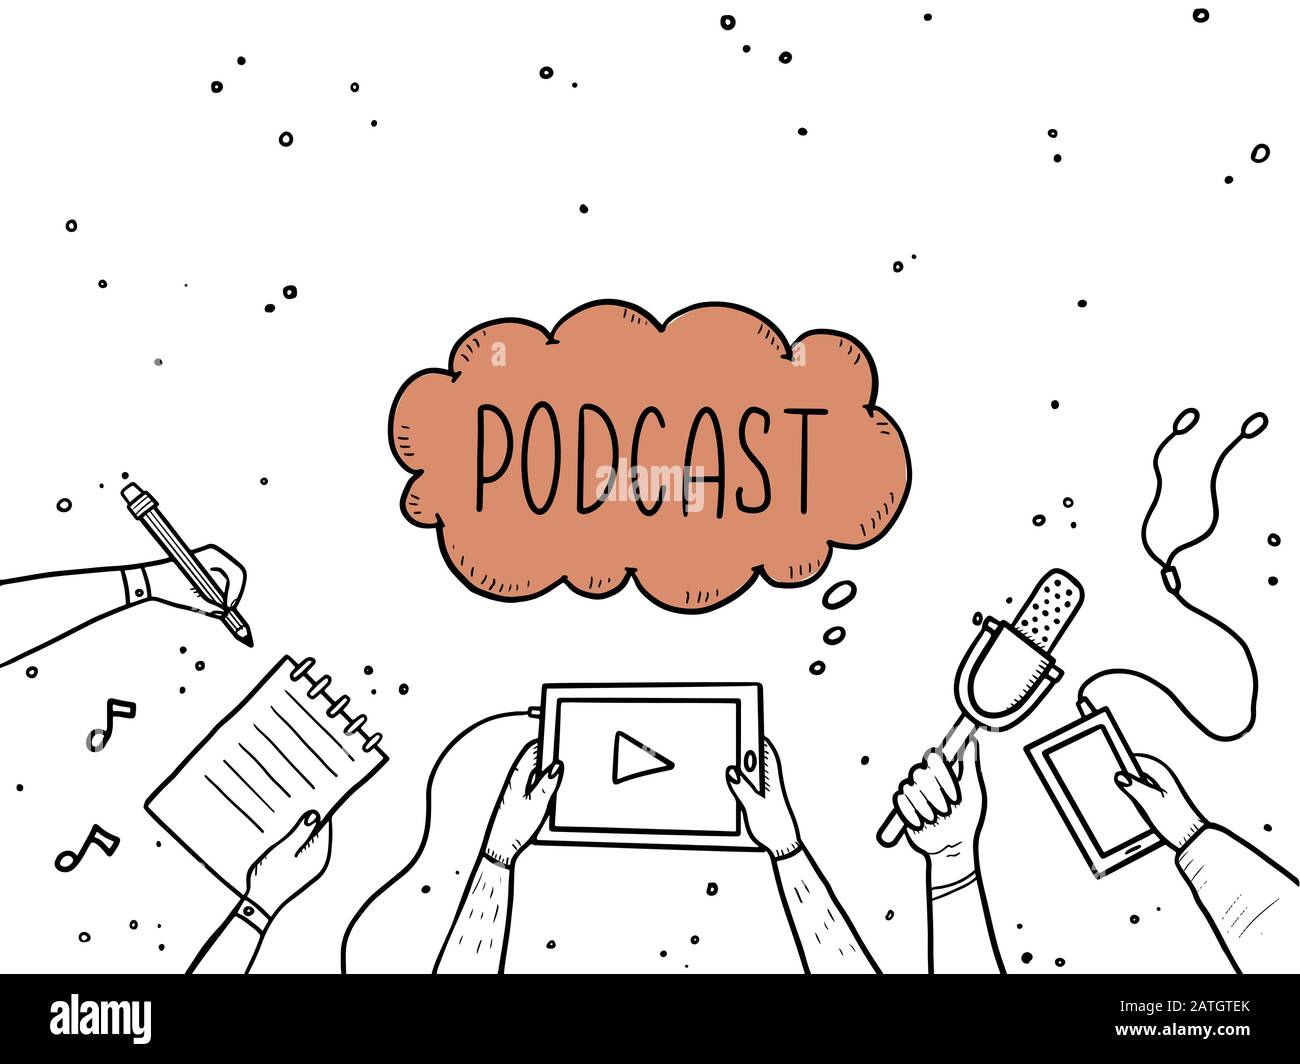 Hand drawn doodle style hands with different elements, microphone, tablet, notebook. Concept of podcast, record broadcast, studio, podcasting business. Vector illustration with text, lettering place Stock Vector